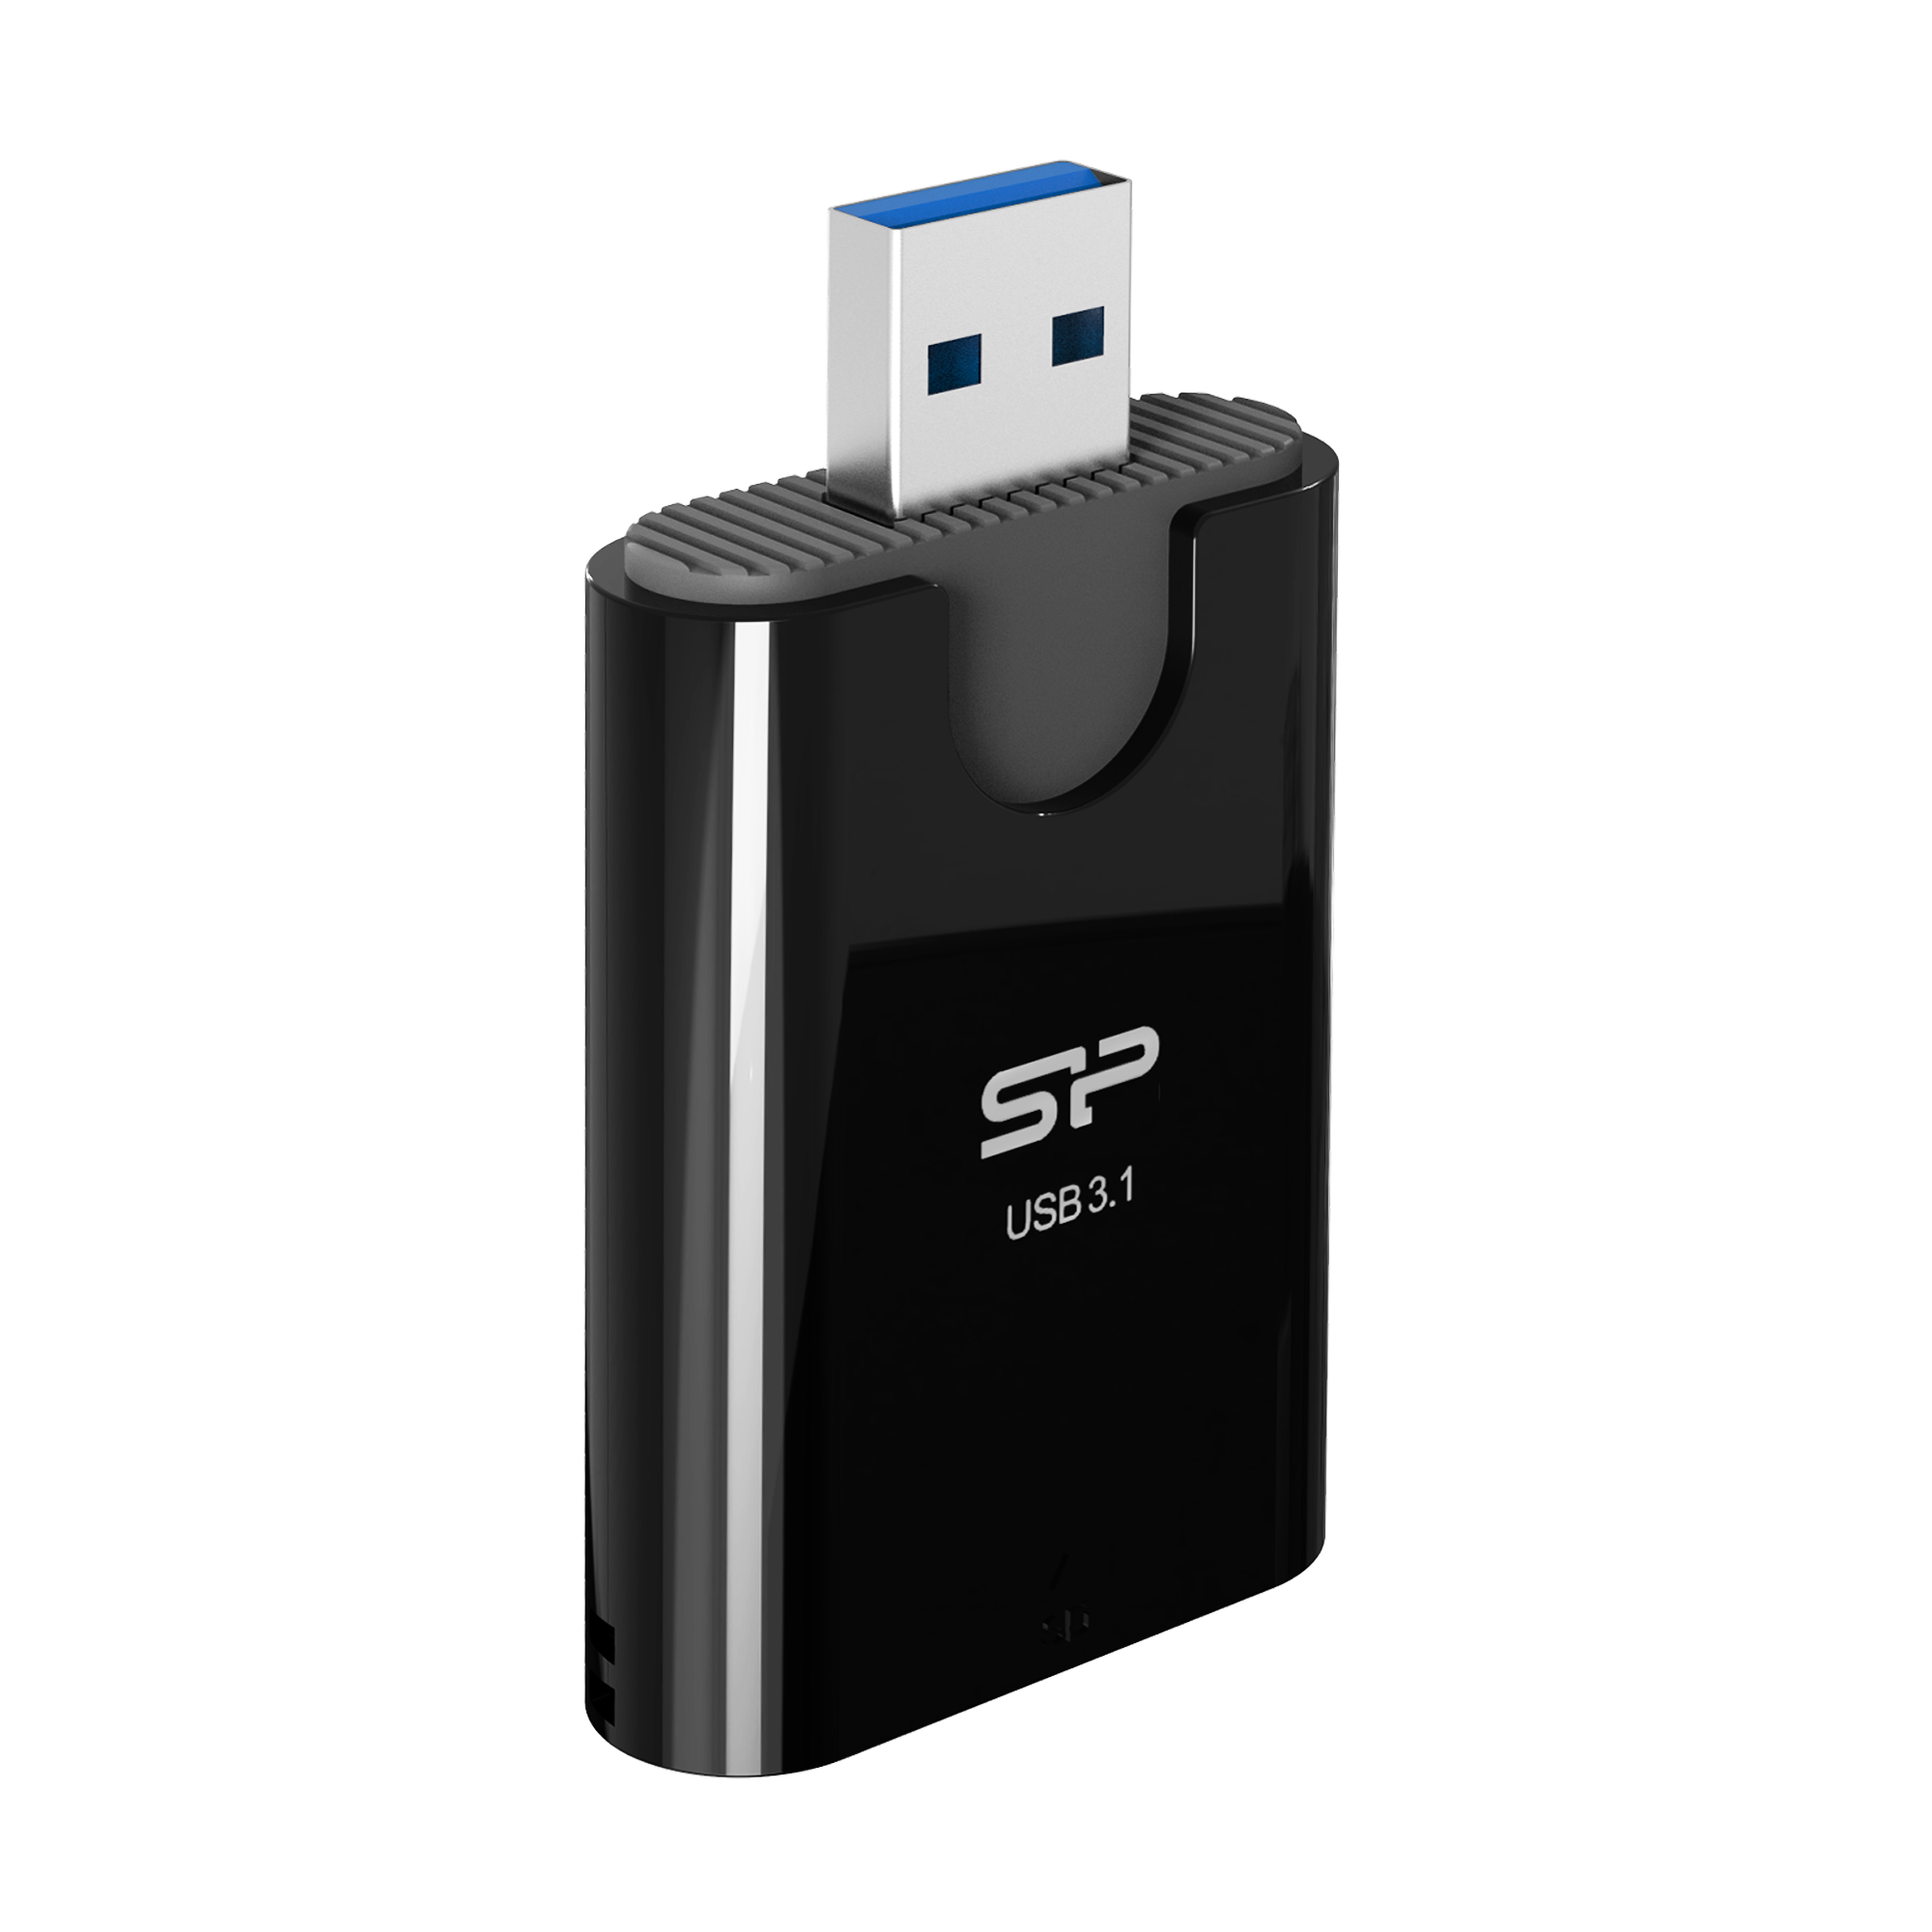 Silicon Power Dual Port Memory Card (SD/ microSD card) Reader Support UHS-I DDR200 speed mode (Black)